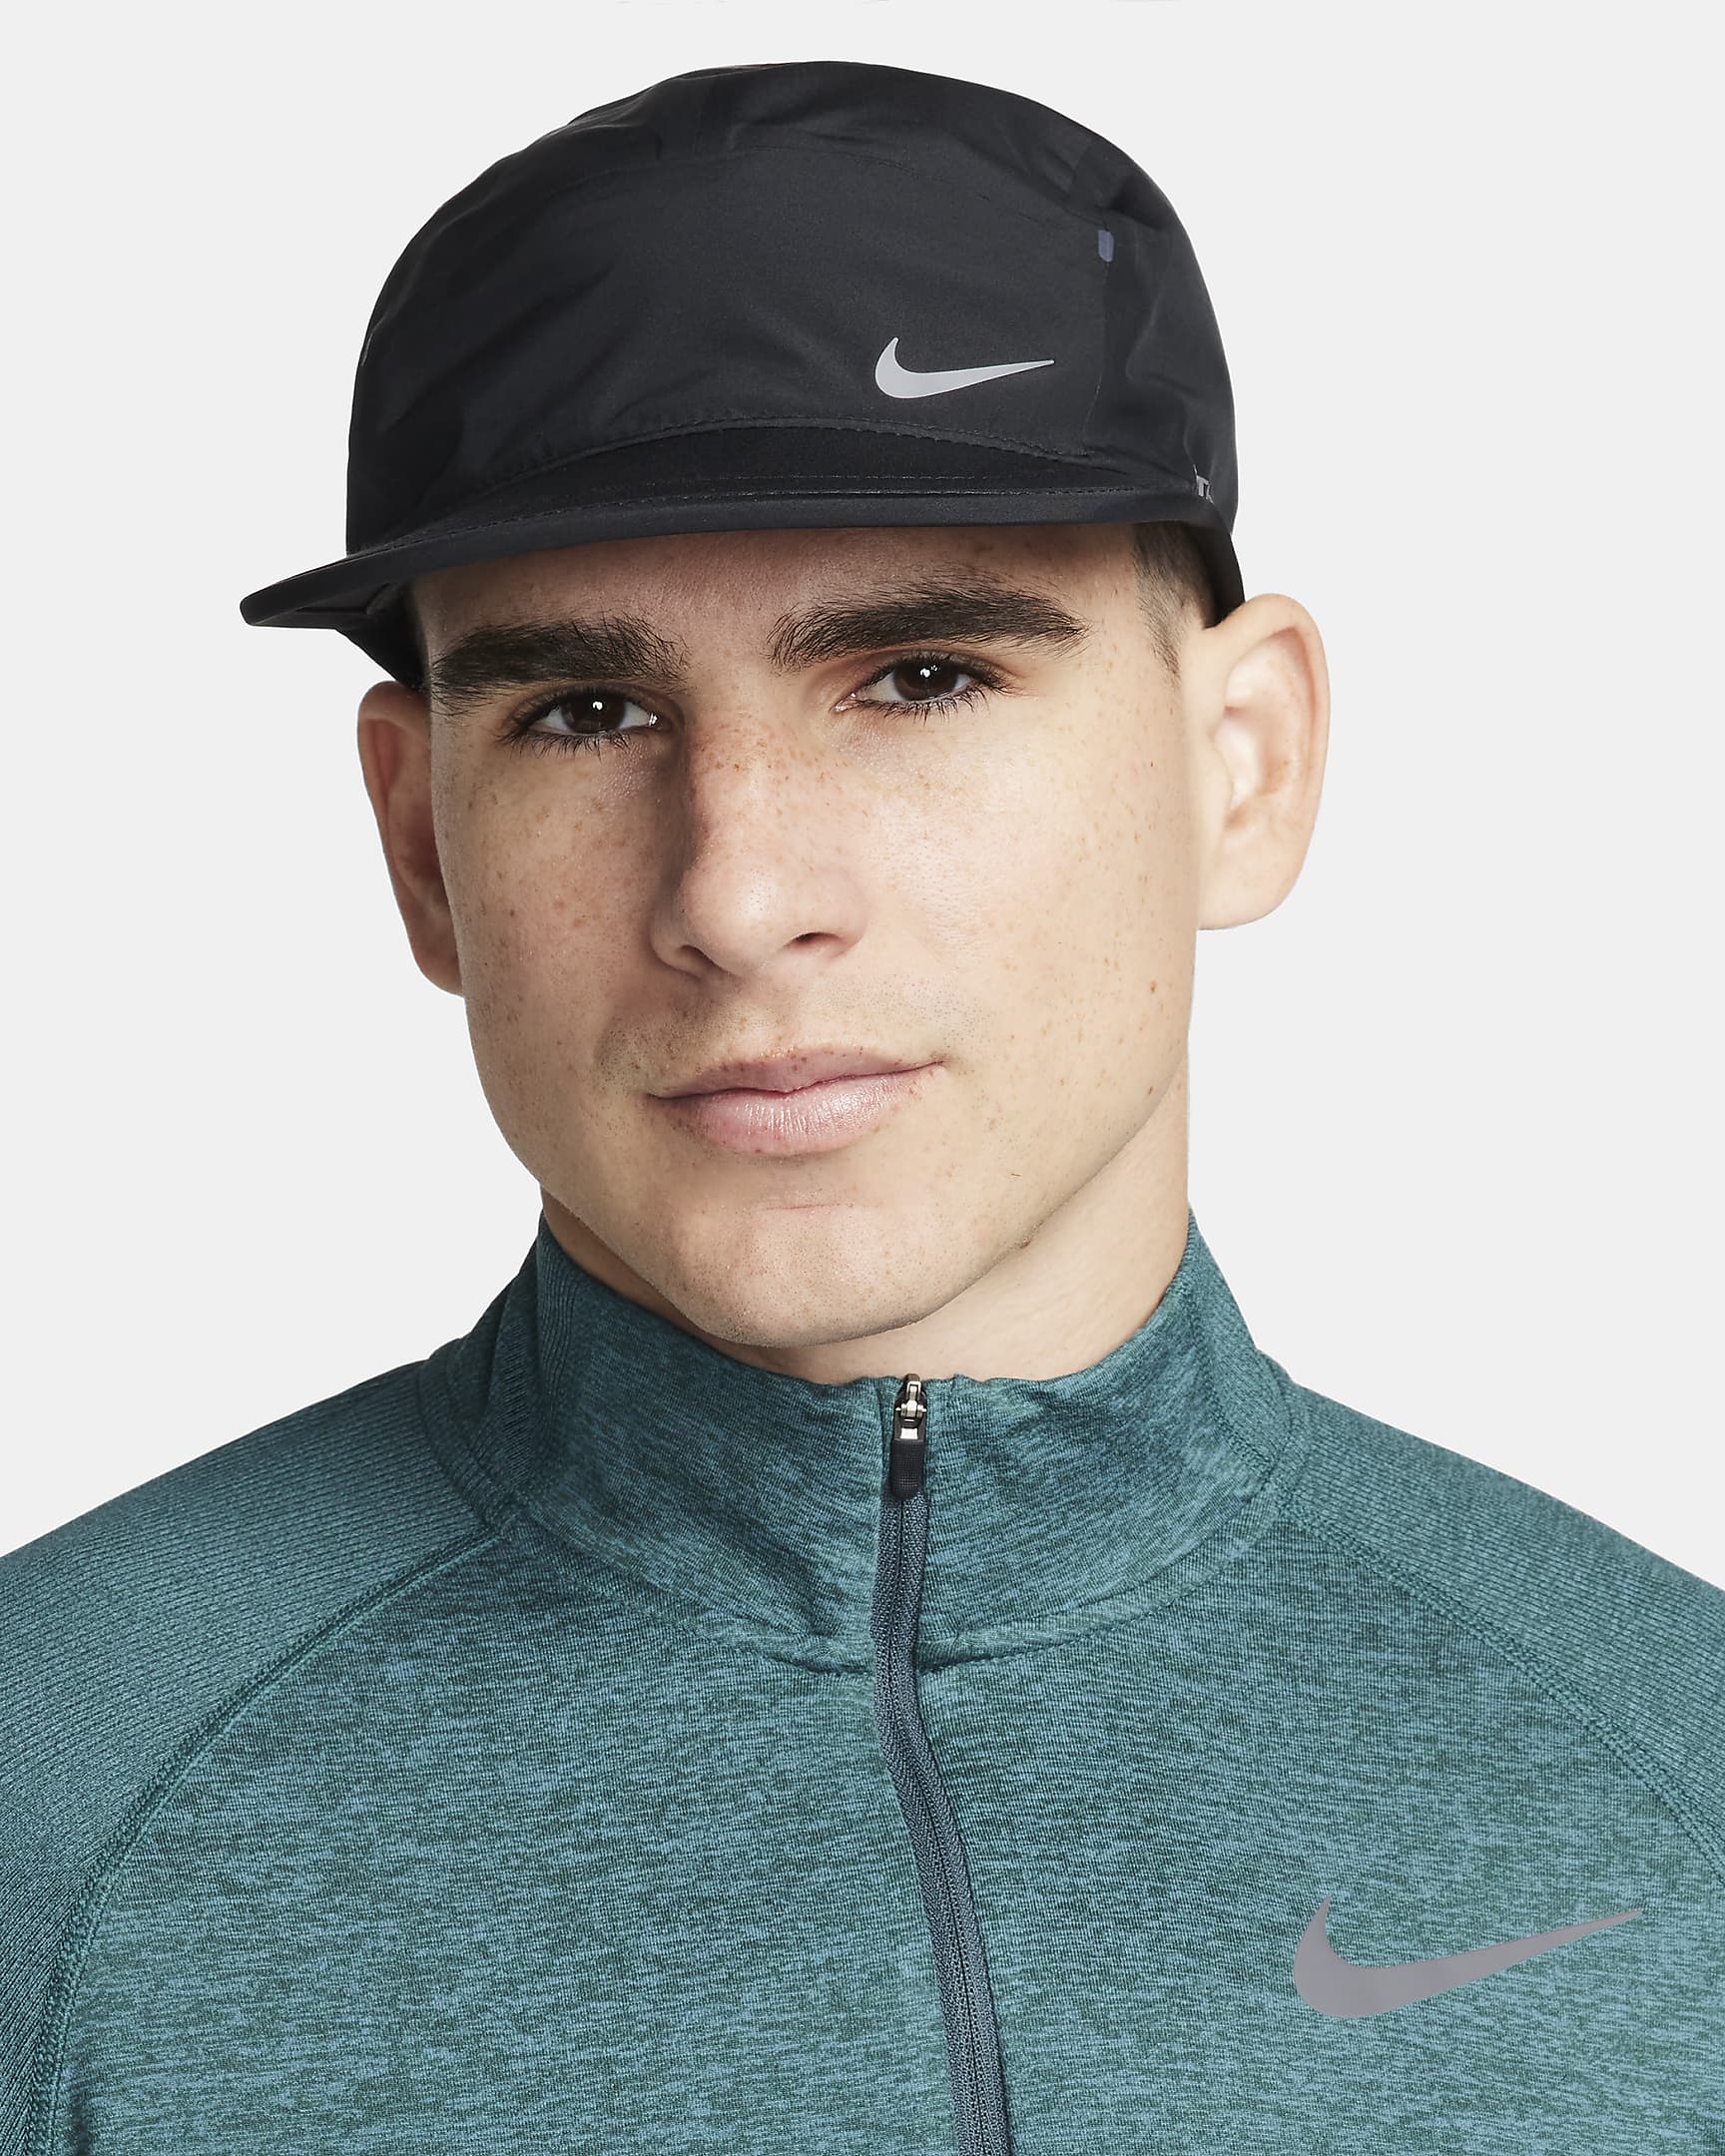 Nike Storm-FIT ADV Fly Unstructured AeroBill Cap. Nike IL